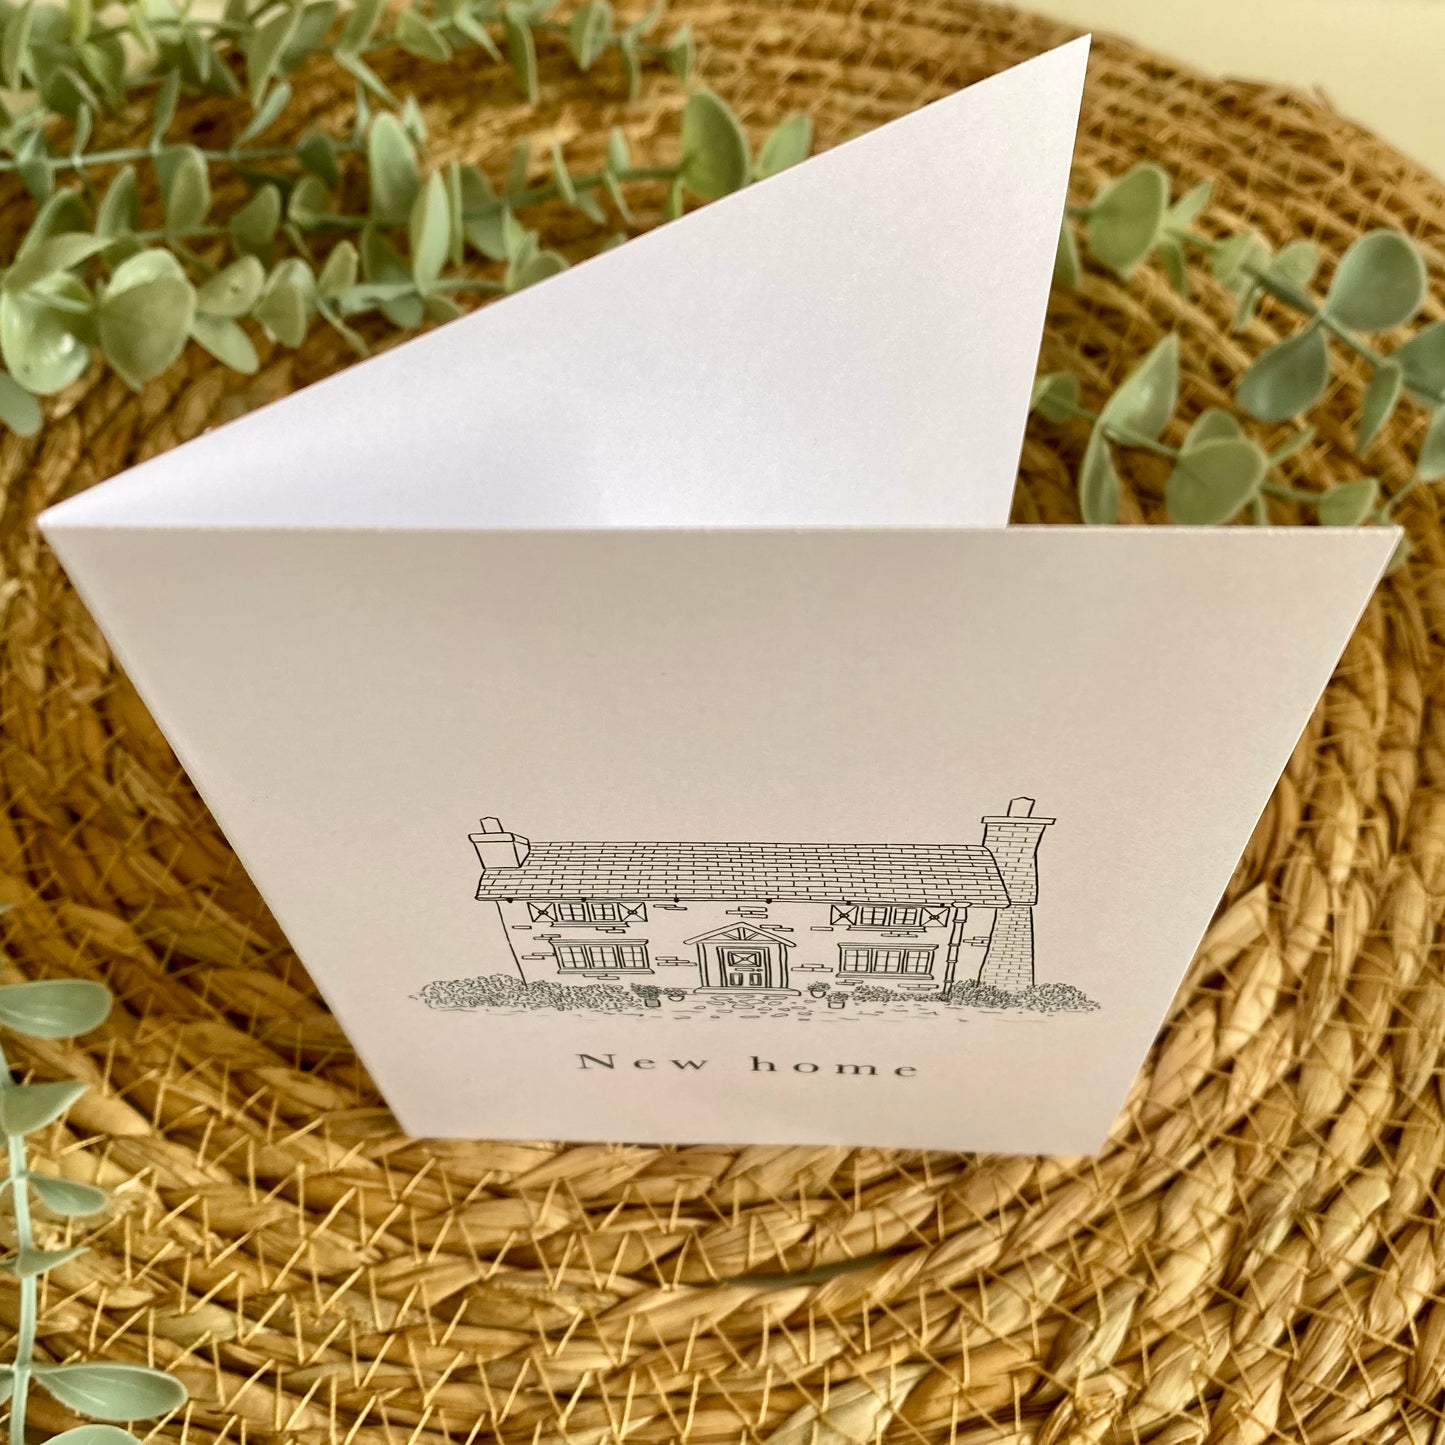 new home | card folded